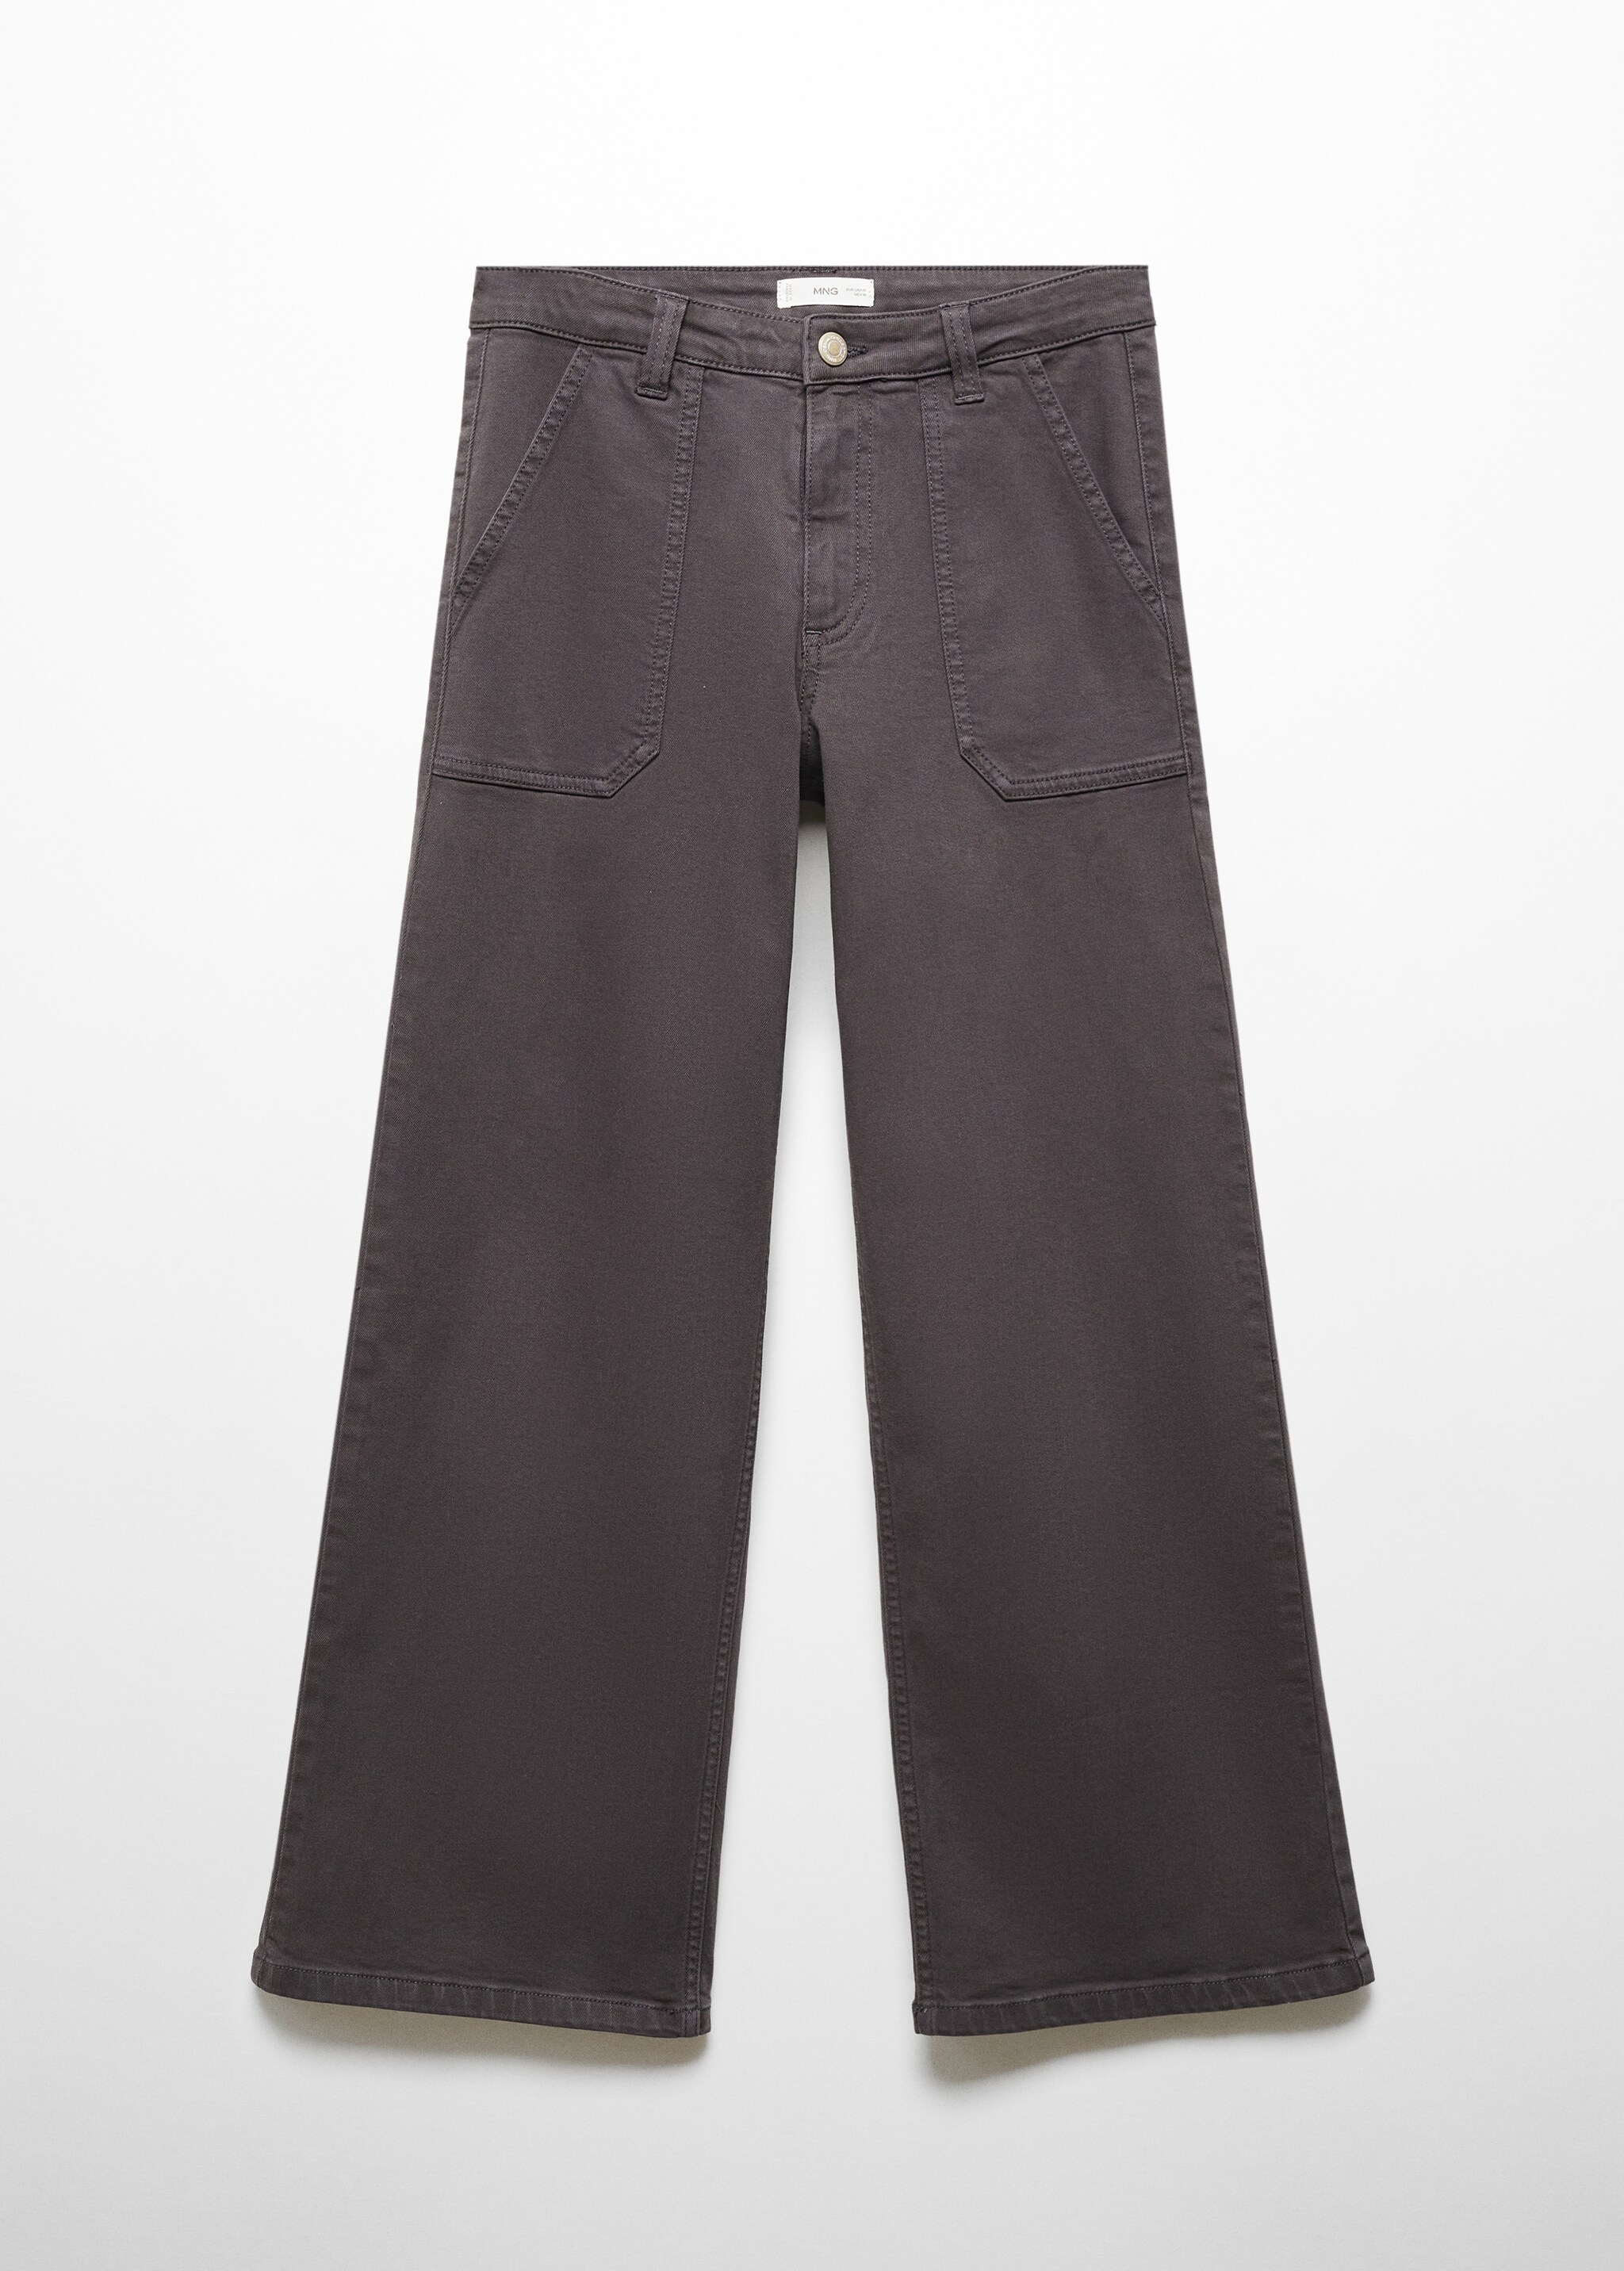 Culotte trousers with pockets - Article without model